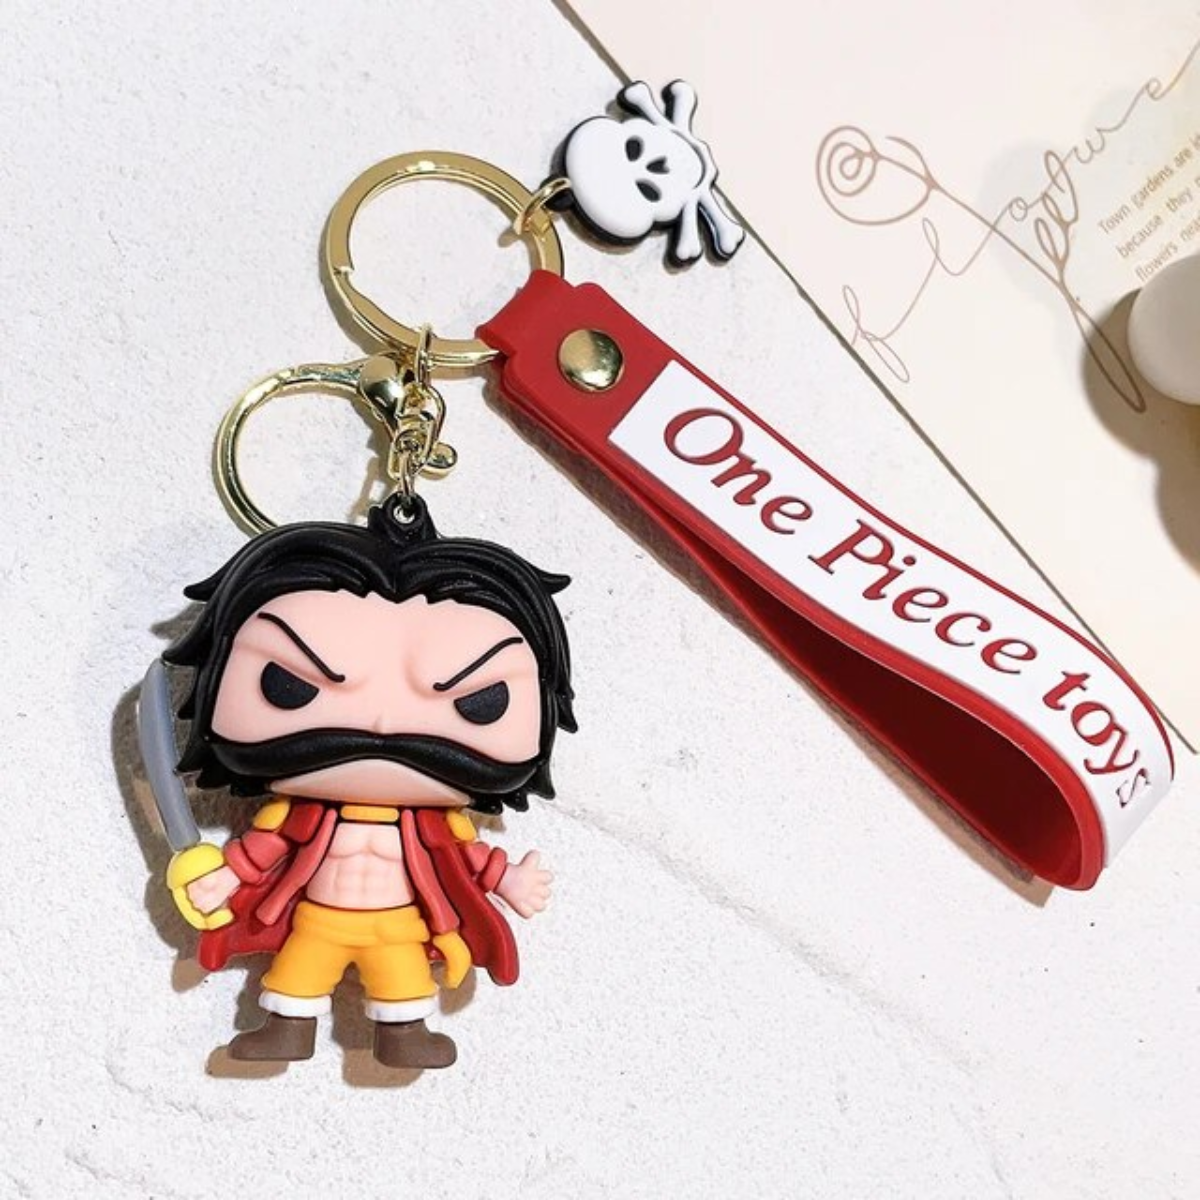 One Piece PVC Keychains: Your Pocket-Sized Piece of the Grand Line